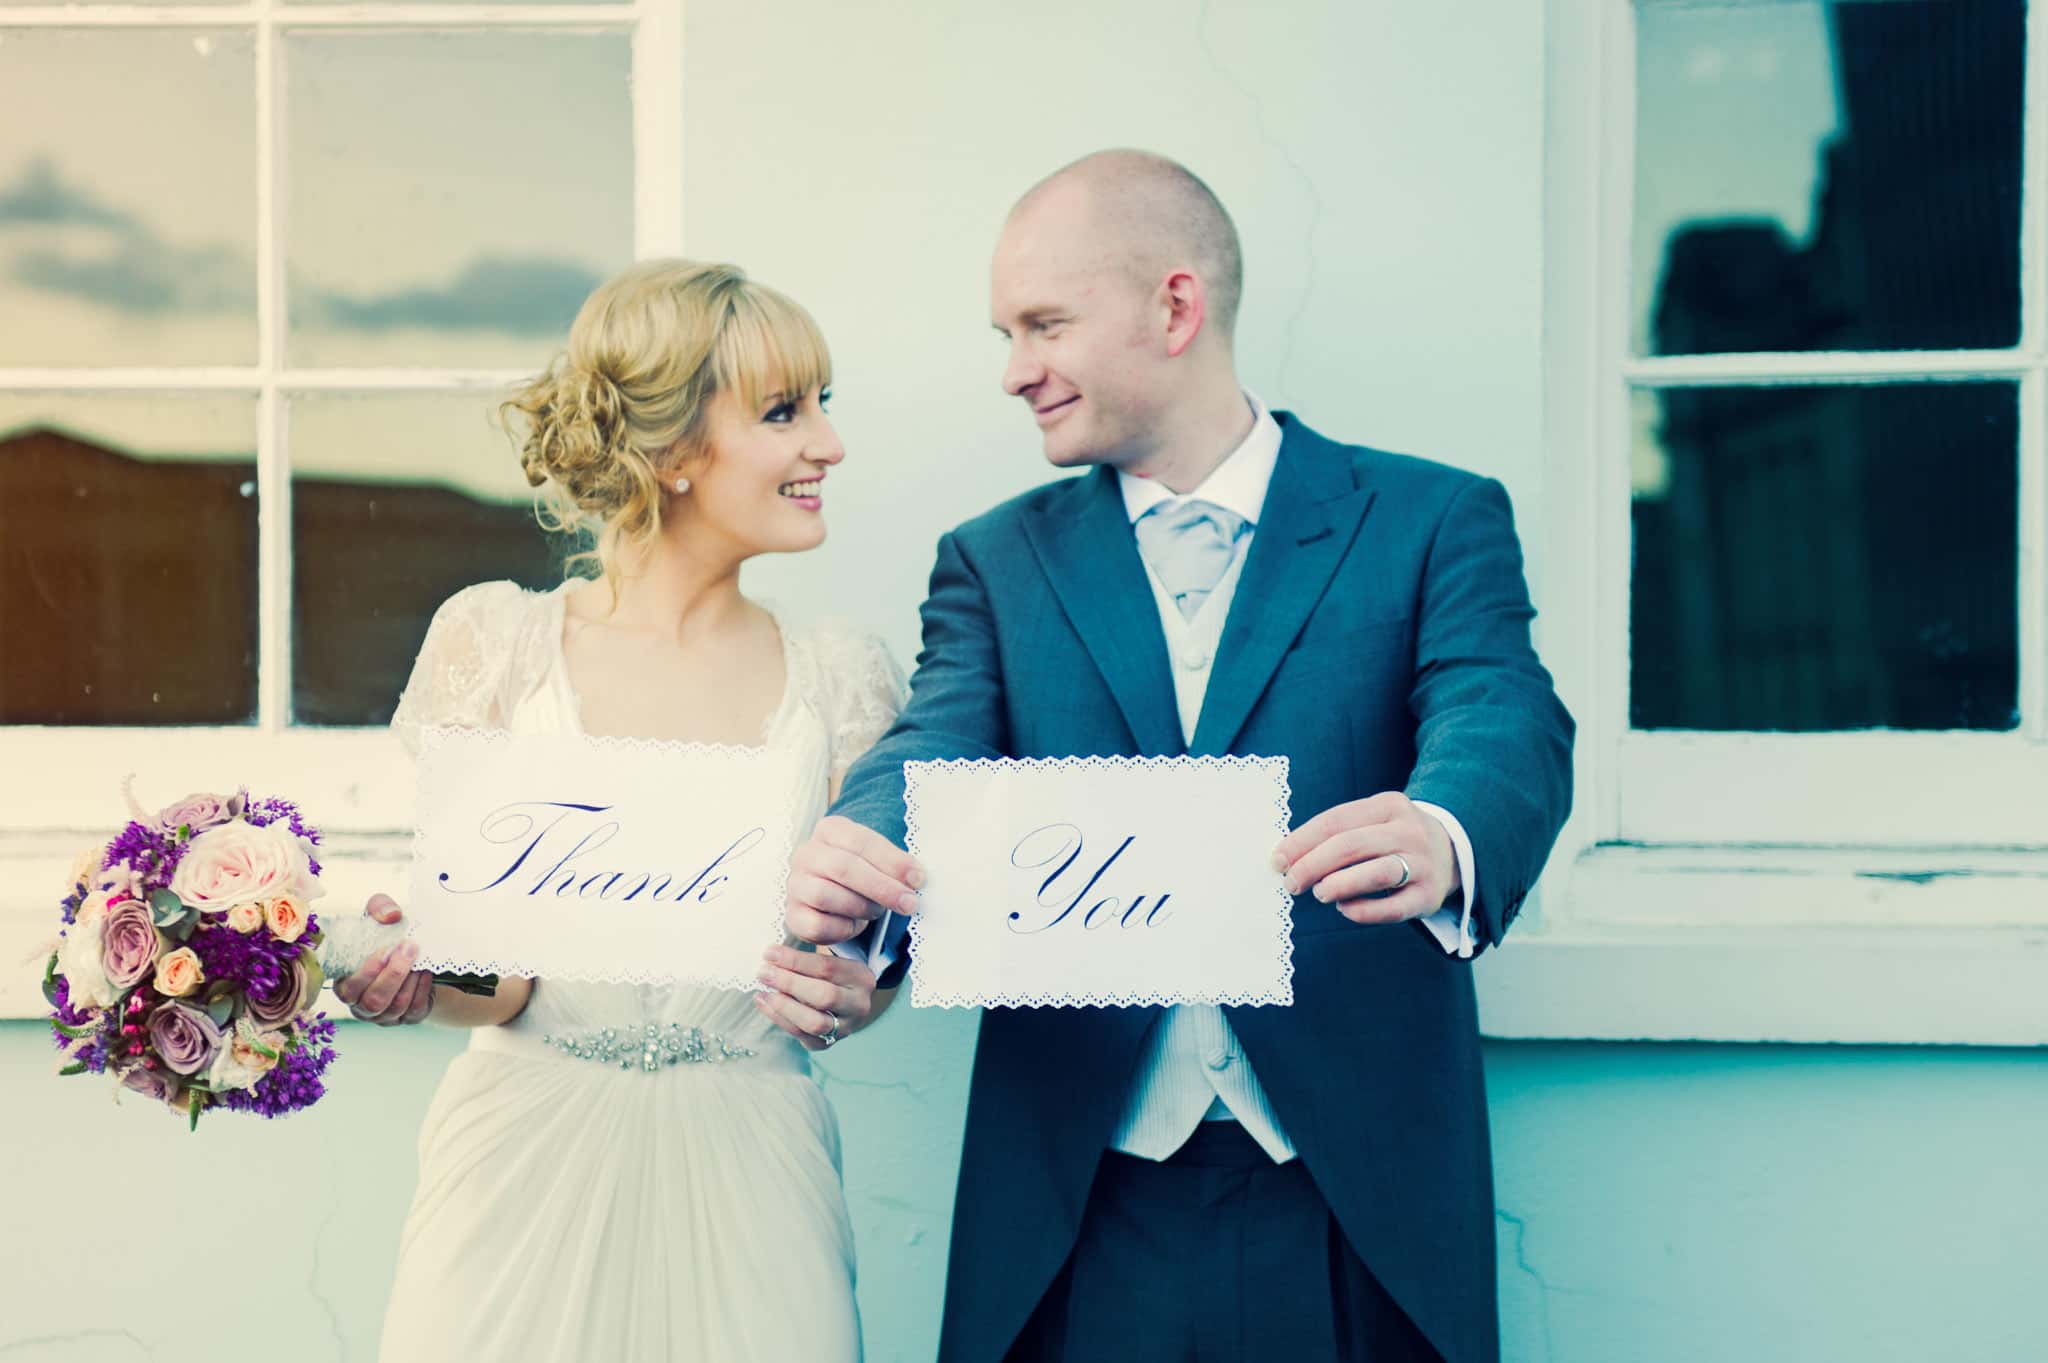 wedding-photography-morgans-hotel-swansea-south-wales (27)